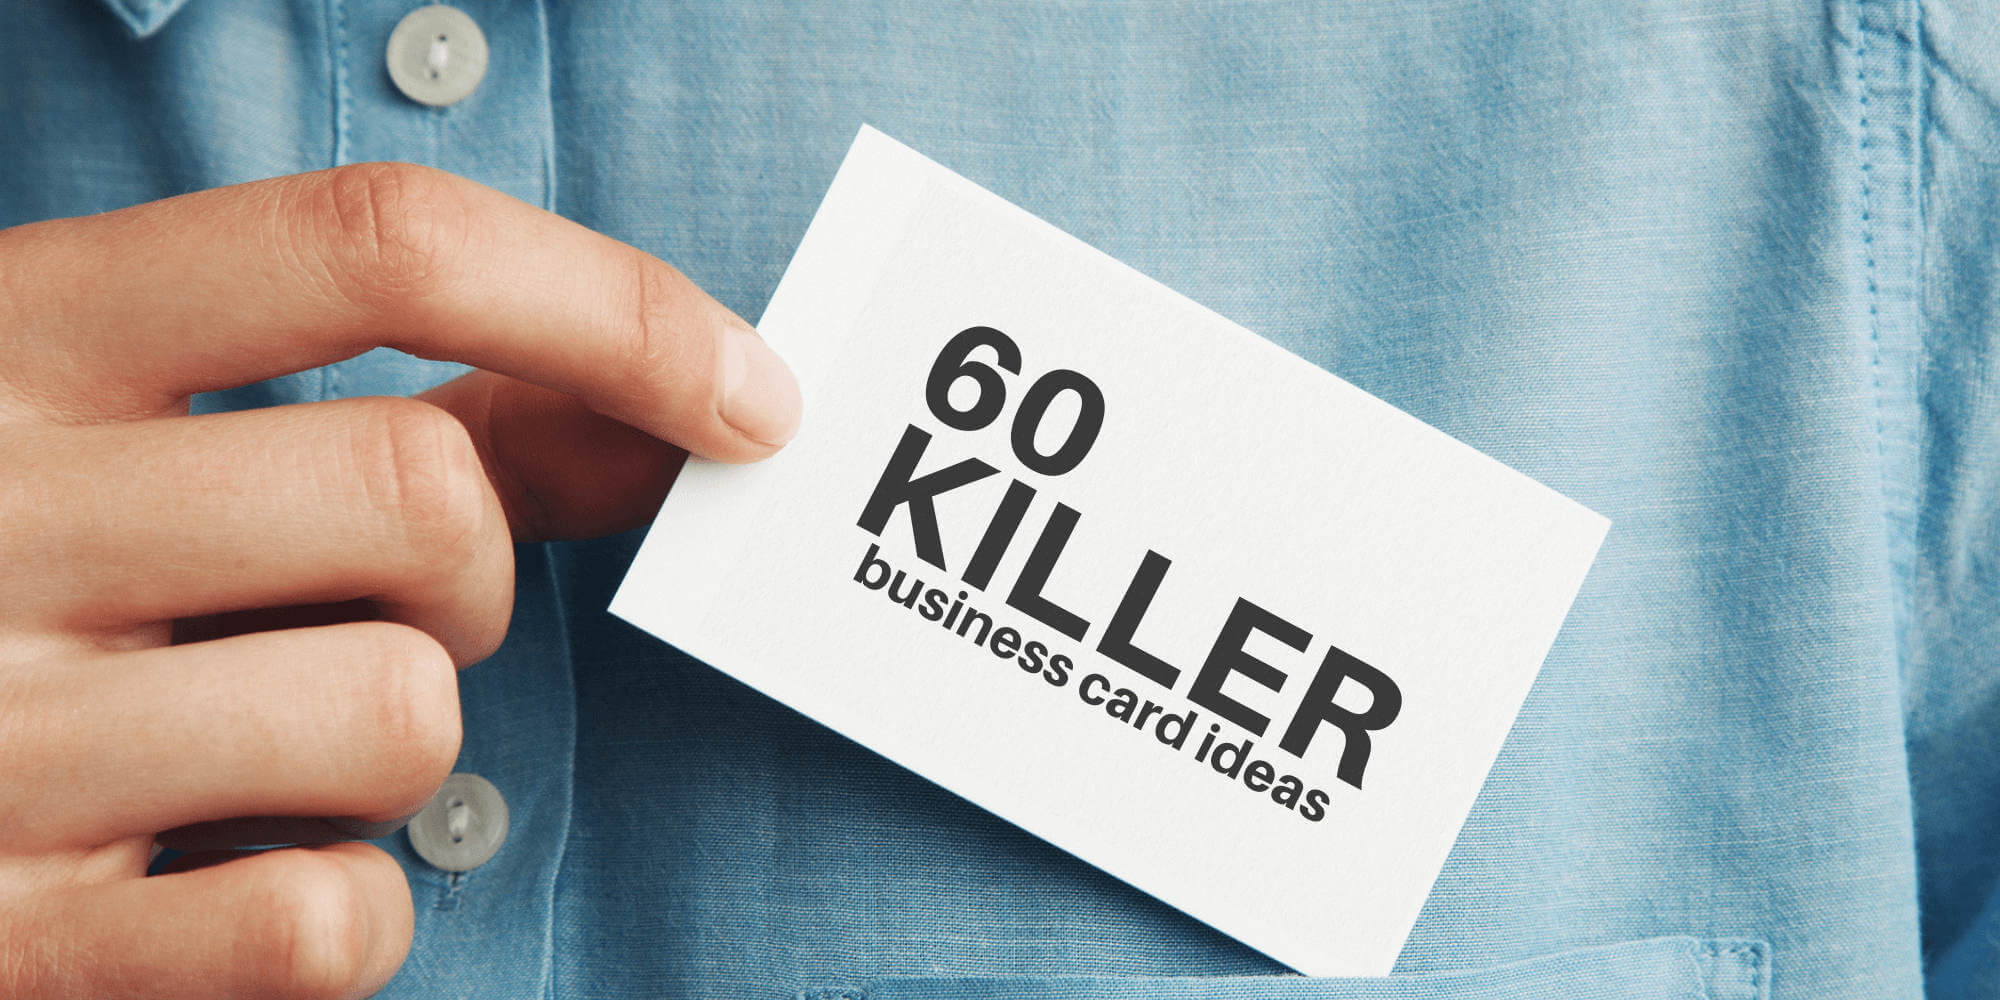 60 Modern Business Cards To Make A Killer First Impression In Freelance Business Card Template